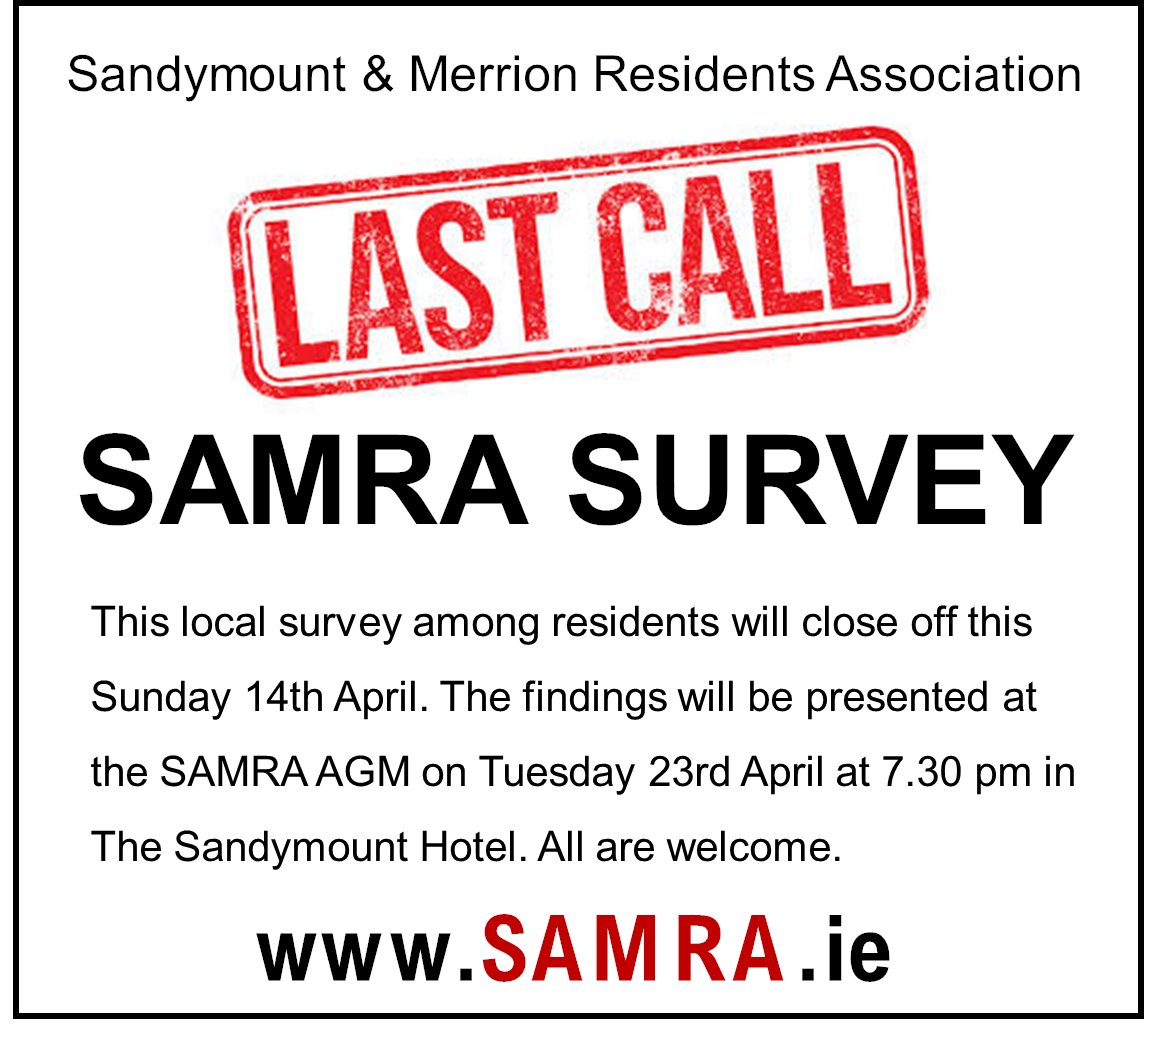 REMINDER. SAMRA's survey will close this Sun 14th April. Findings presented at SAMRA's AGM on Tues 23rd April at 7.30 pm in The Sandymount Hotel. All welcome. Follow this link to complete survey. ee-eu.kobotoolbox.org/x/OlU0bsgv. @newsFour @ivanabacik @EamonRyan @hazechu @LaceyDermot